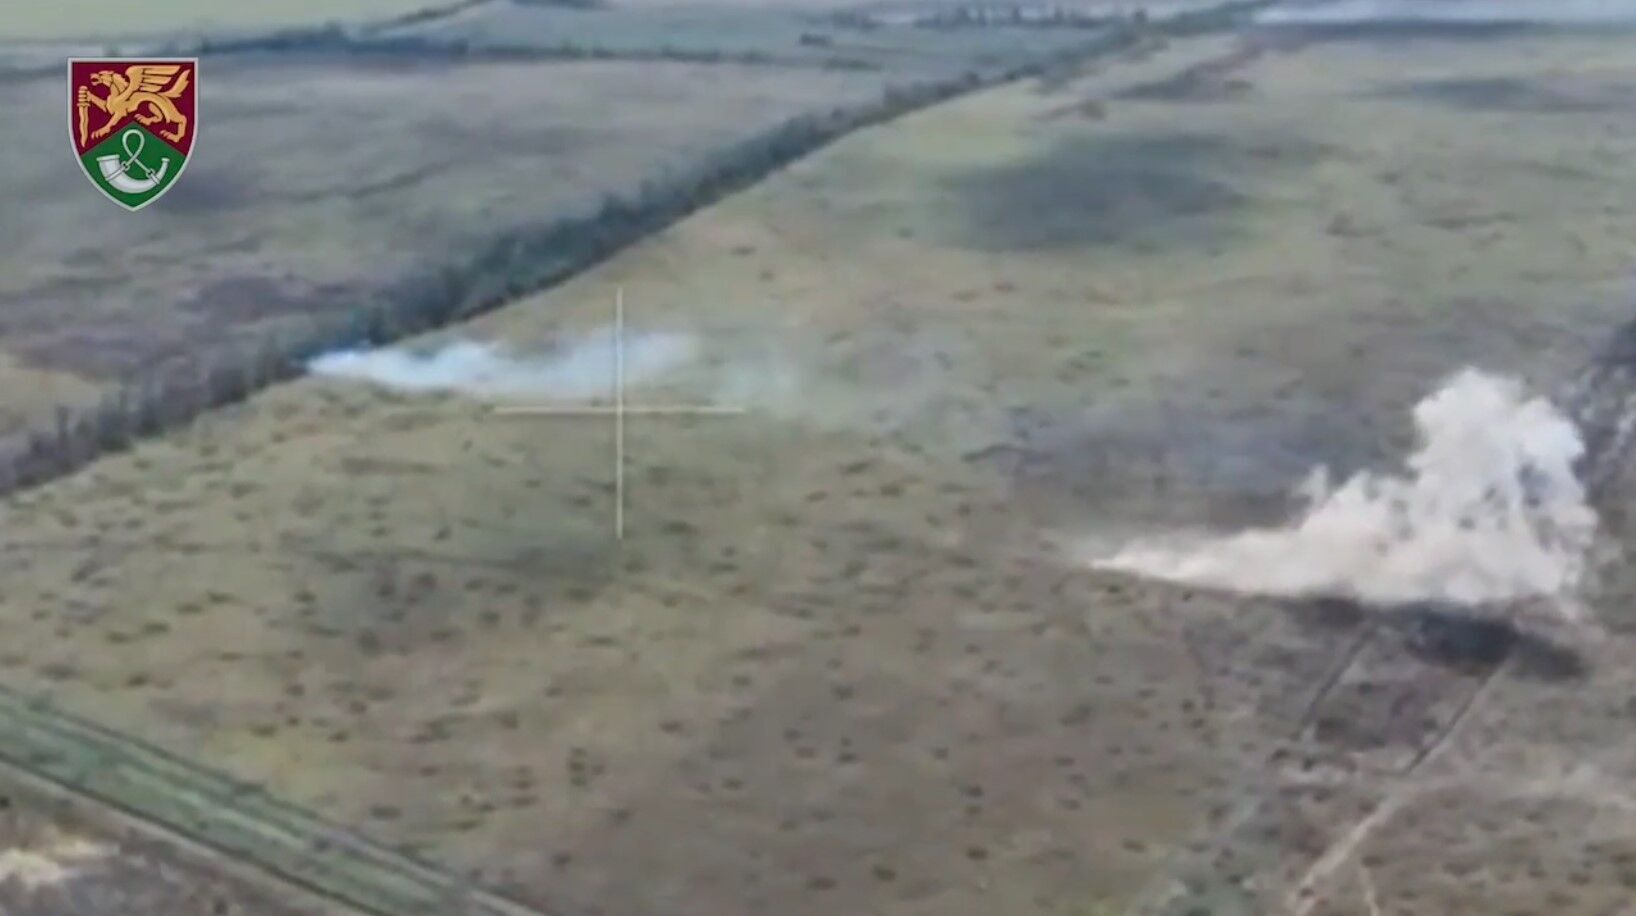 Paratroopers showed how they knocked out the enemy from their positions: the occupants fled, but were destroyed. Video